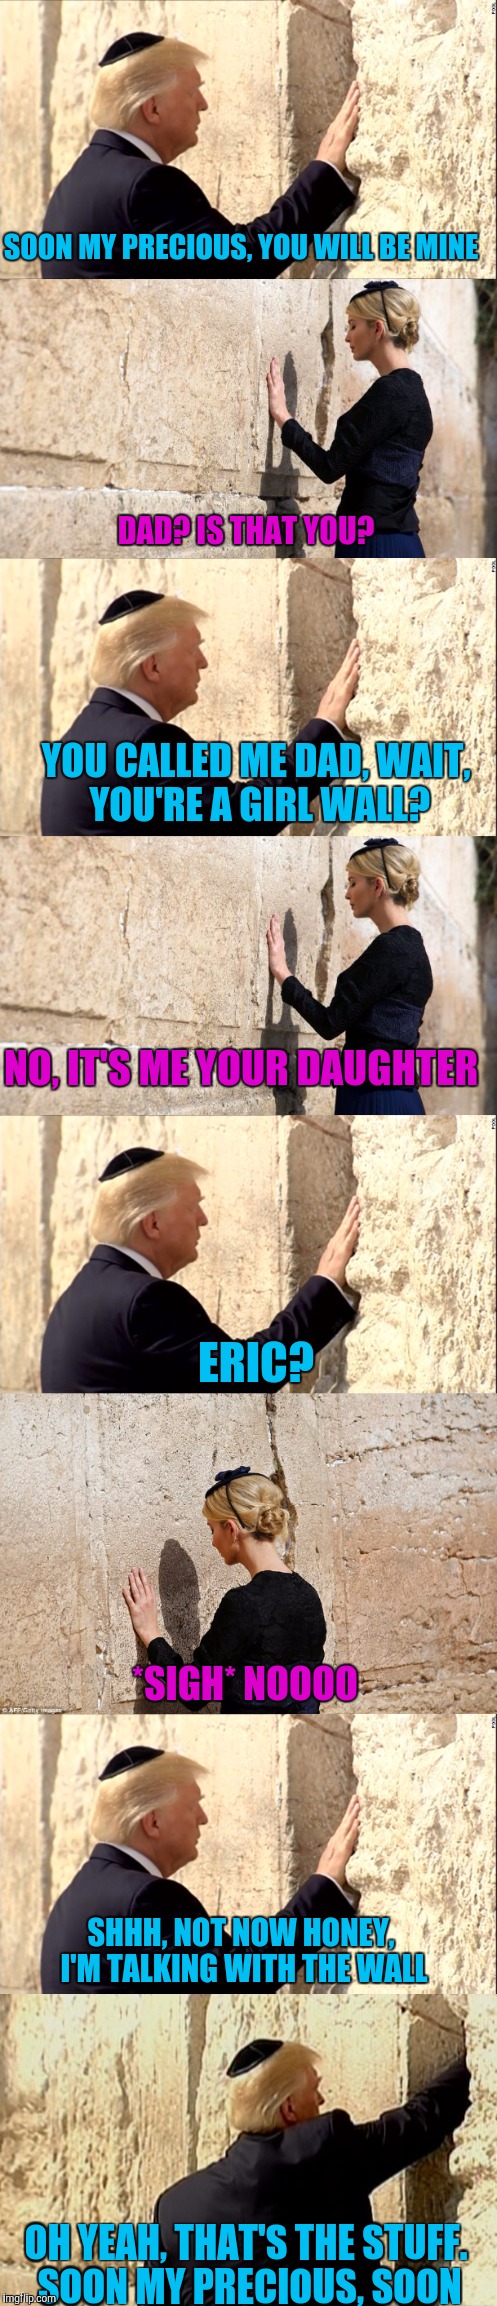 Trump and the Wall. A love story. | SOON MY PRECIOUS, YOU WILL BE MINE; DAD? IS THAT YOU? YOU CALLED ME DAD, WAIT, YOU'RE A GIRL WALL? NO, IT'S ME YOUR DAUGHTER; ERIC? *SIGH* NOOOO; SHHH, NOT NOW HONEY, I'M TALKING WITH THE WALL; OH YEAH, THAT'S THE STUFF. SOON MY PRECIOUS, SOON | image tagged in sewmyeyesshut,donald trump,ivanka trump,wailing wall,the wall | made w/ Imgflip meme maker